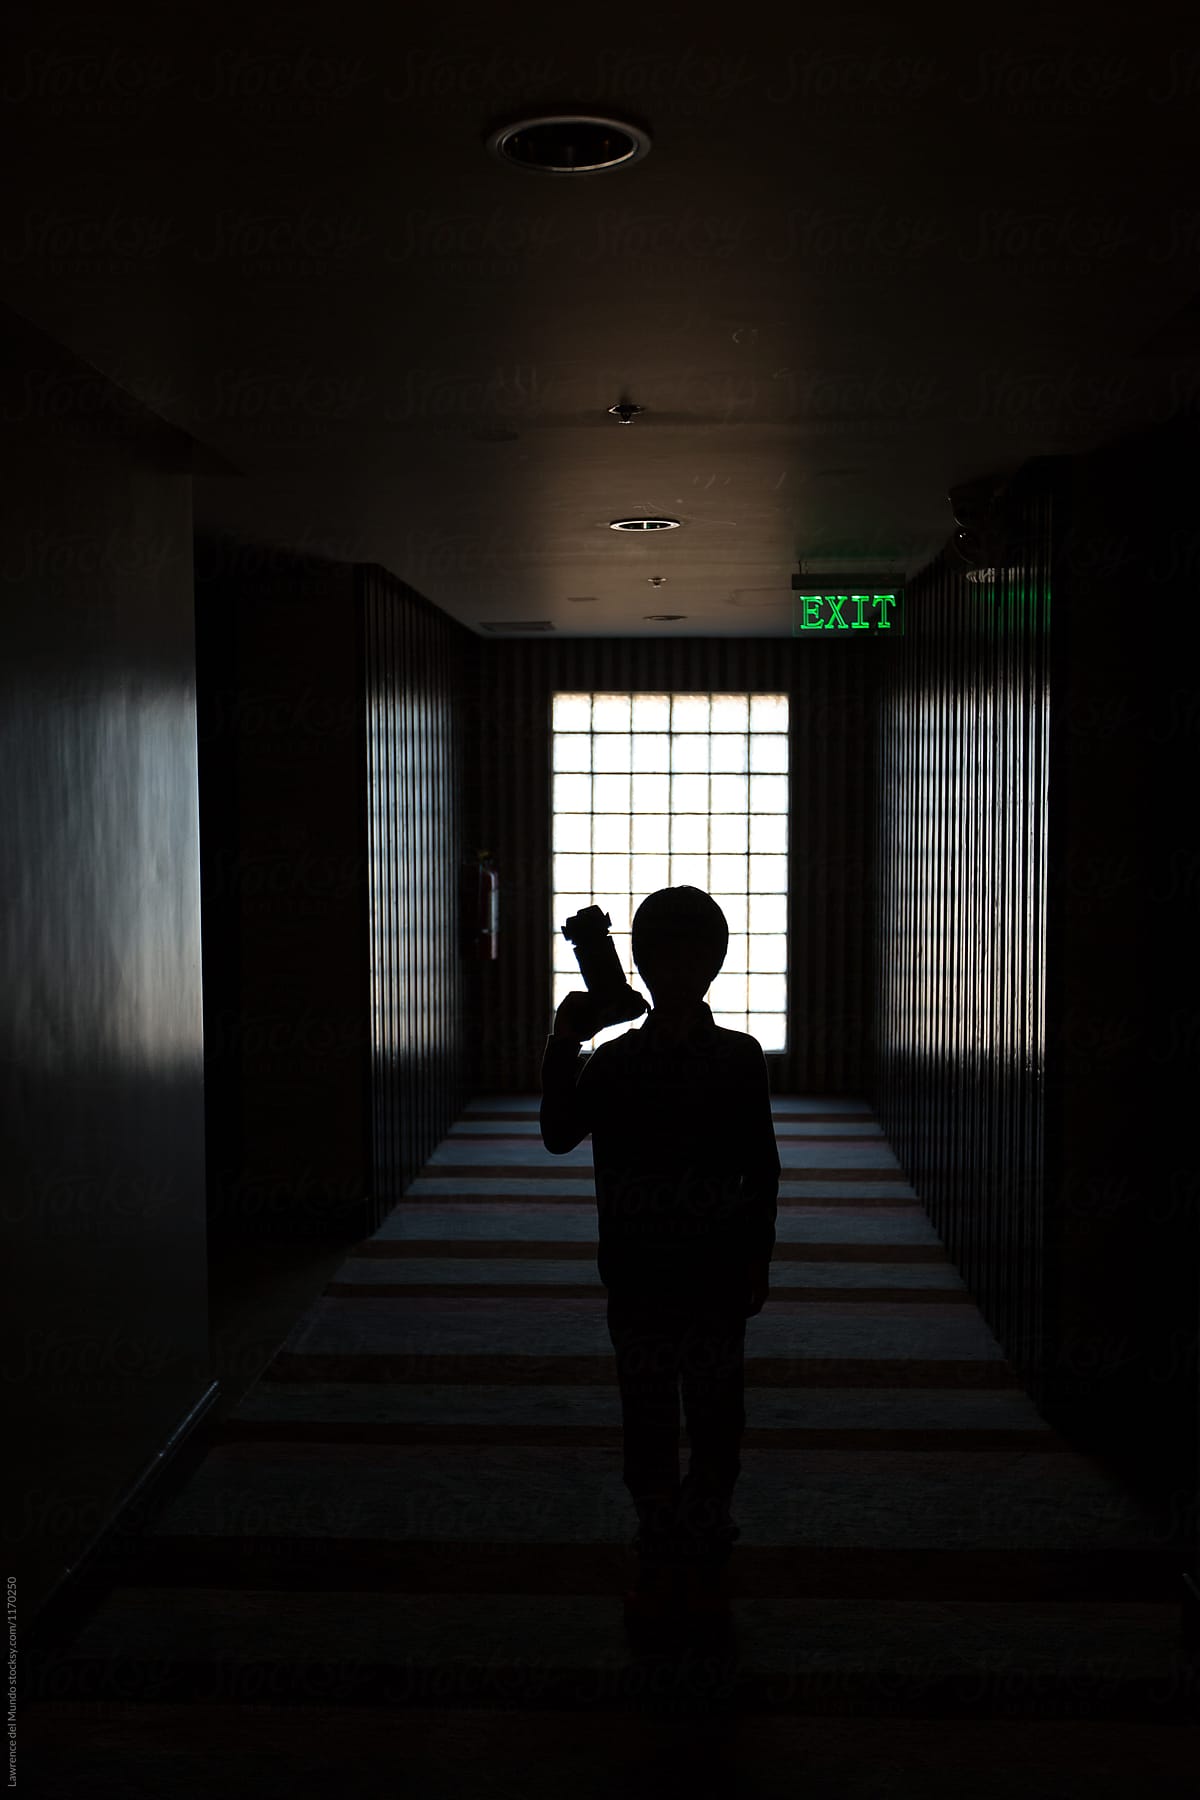 Silhouette of a young boy with a camera, standing in a dark hallway.